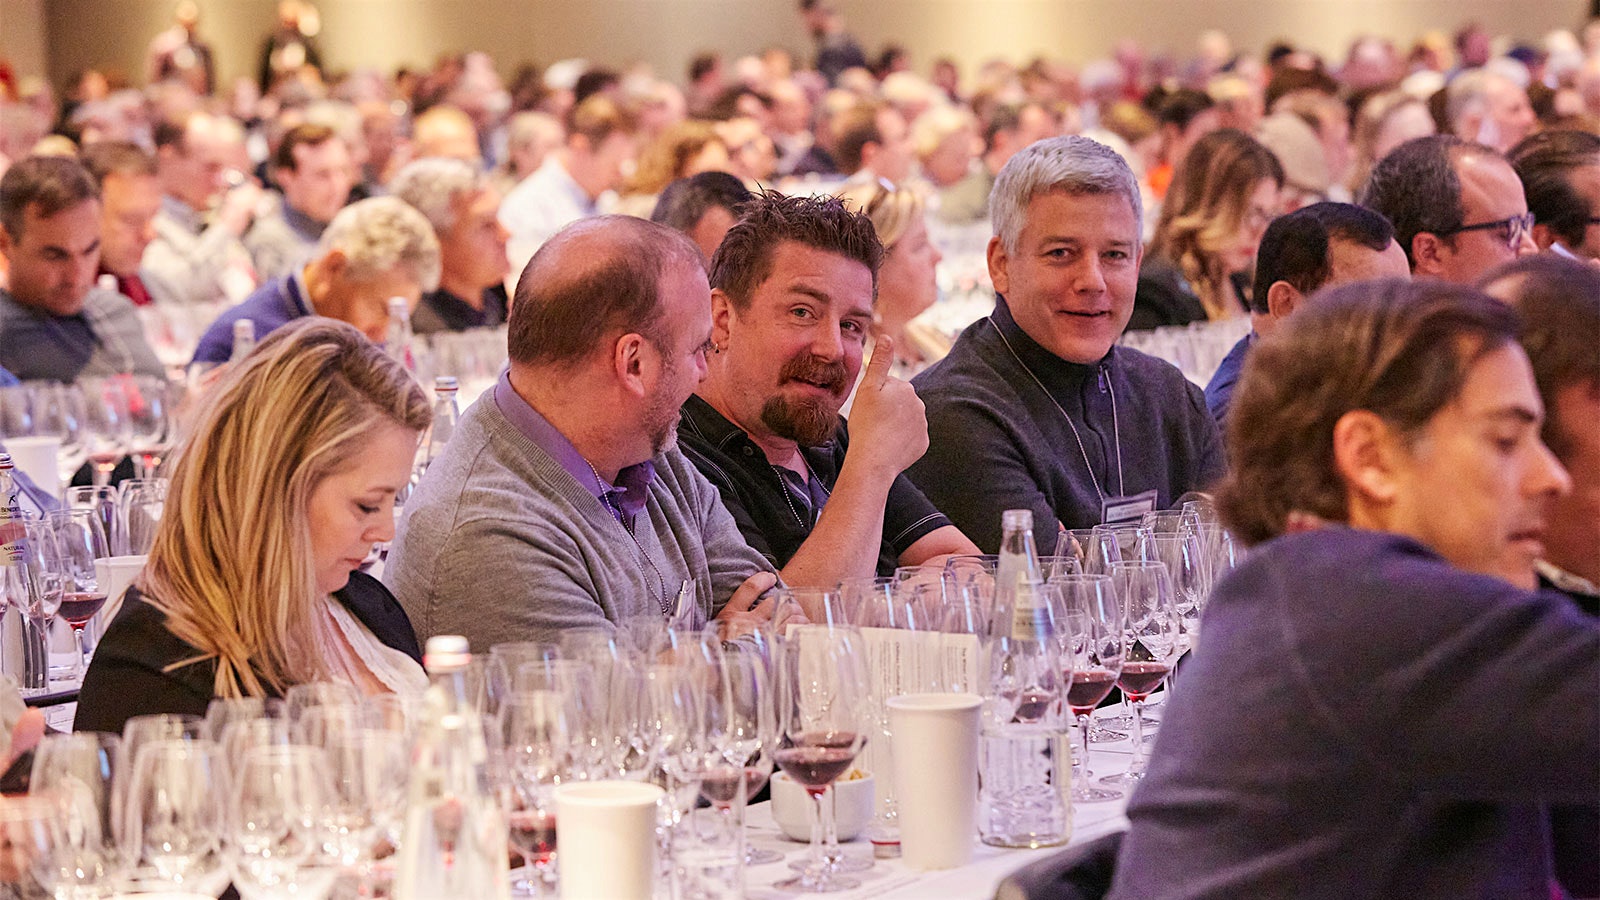  Guests enjoying the Oregon Pinot Noir seminar at the 2022 New York Wine Experience, in the NY Marriott Marquis ballroom